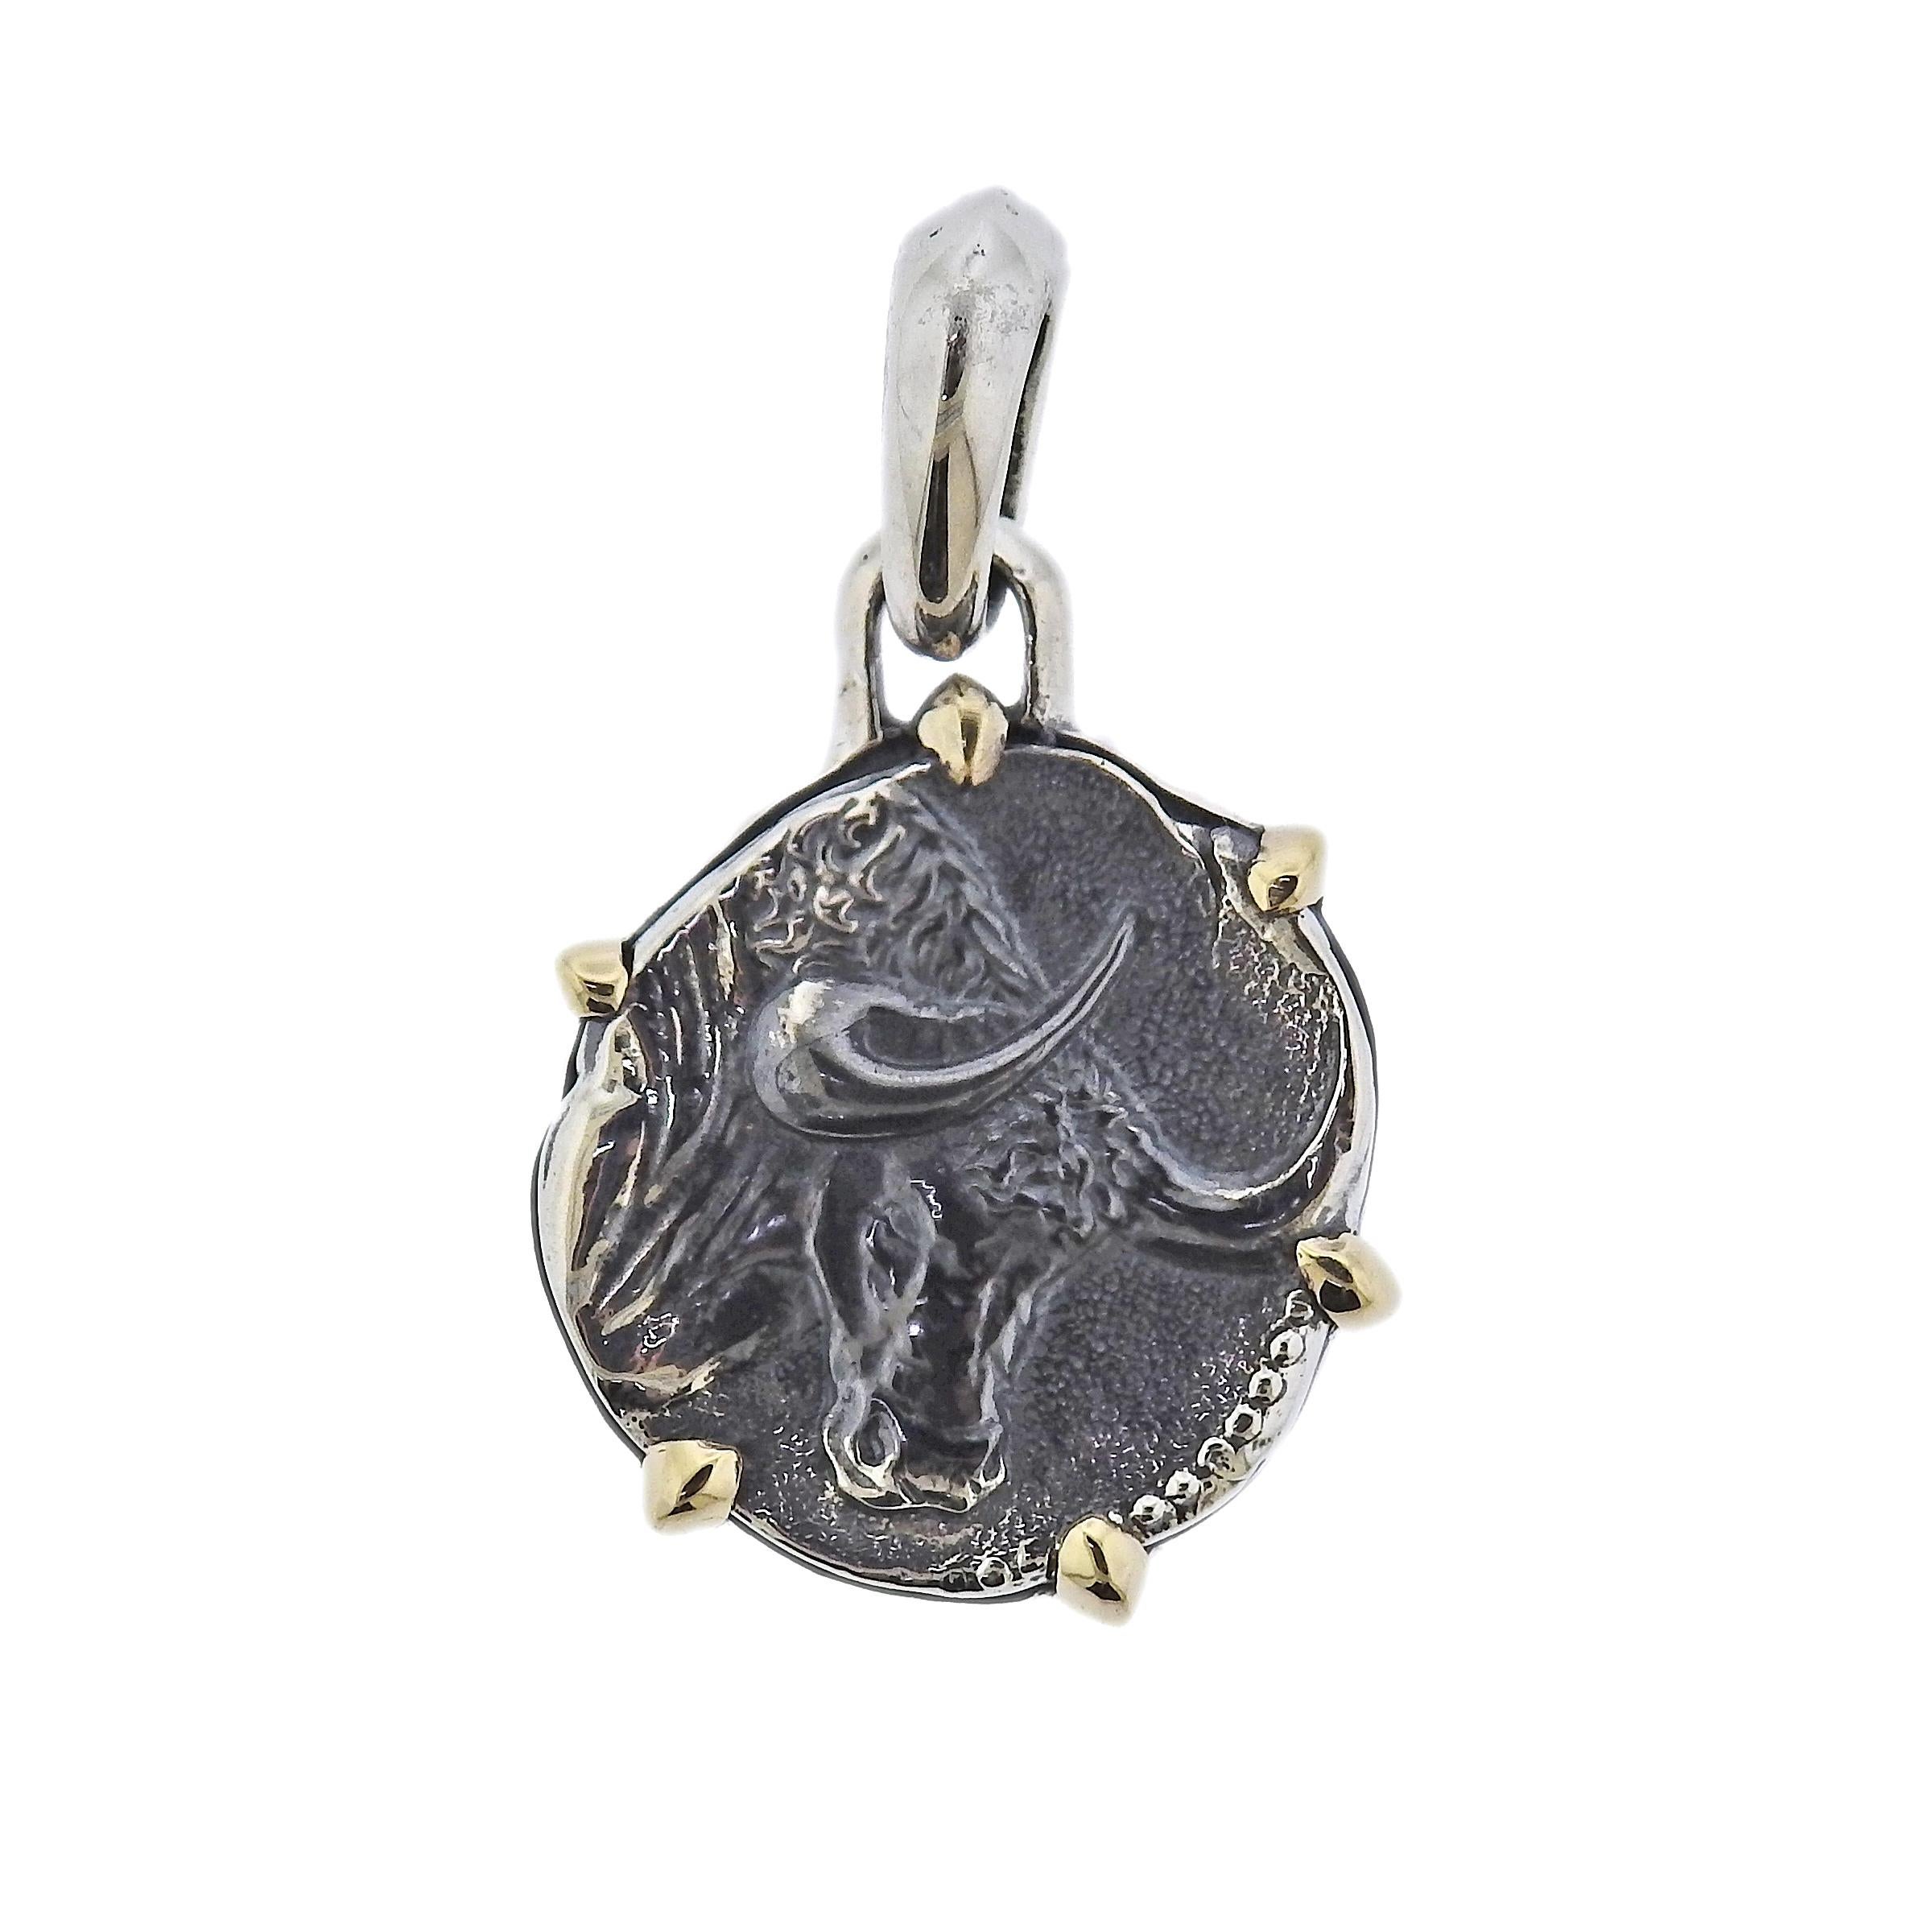 David Yurman sterling silver and 18k gold Taurus Zodiac pendant. Retail $550. Pendant is 33mm with bale x 20mm. Weight - 5.9 grams. Marked: D.Y., 925, 750.